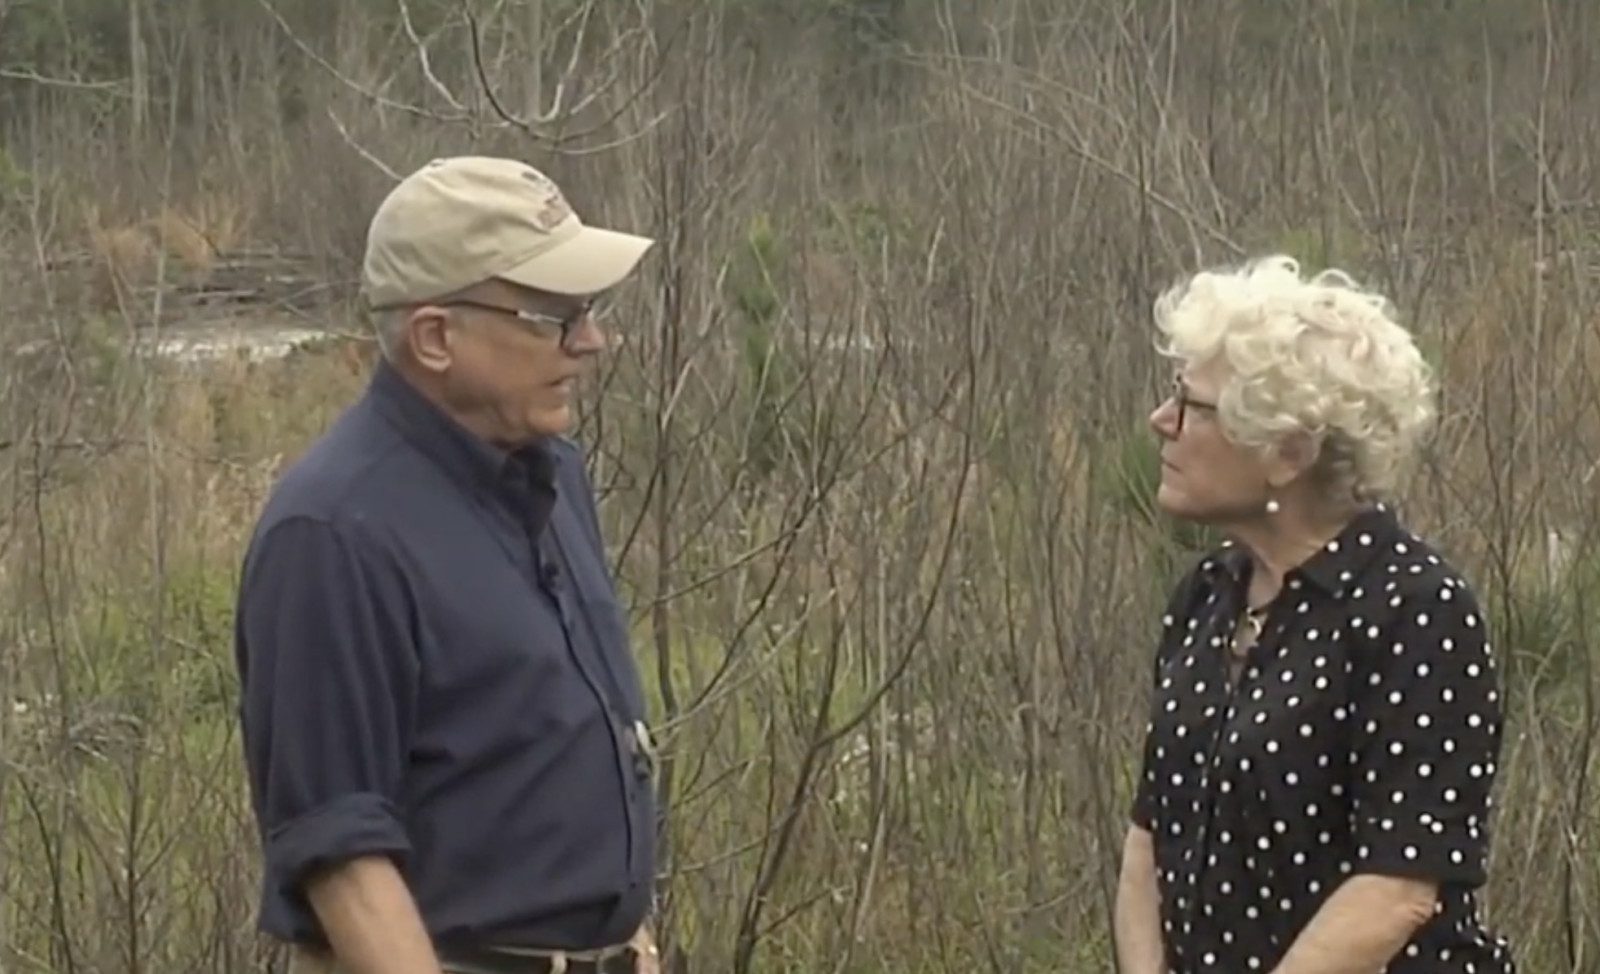 Clemson Extension Agent Amanda McNulty and John Nelson of the University of South Carolina Herbarium take a field trip to Clarendon County near Pinewood as they explore a Seep during a Making It Grow show that won a Telly this year.